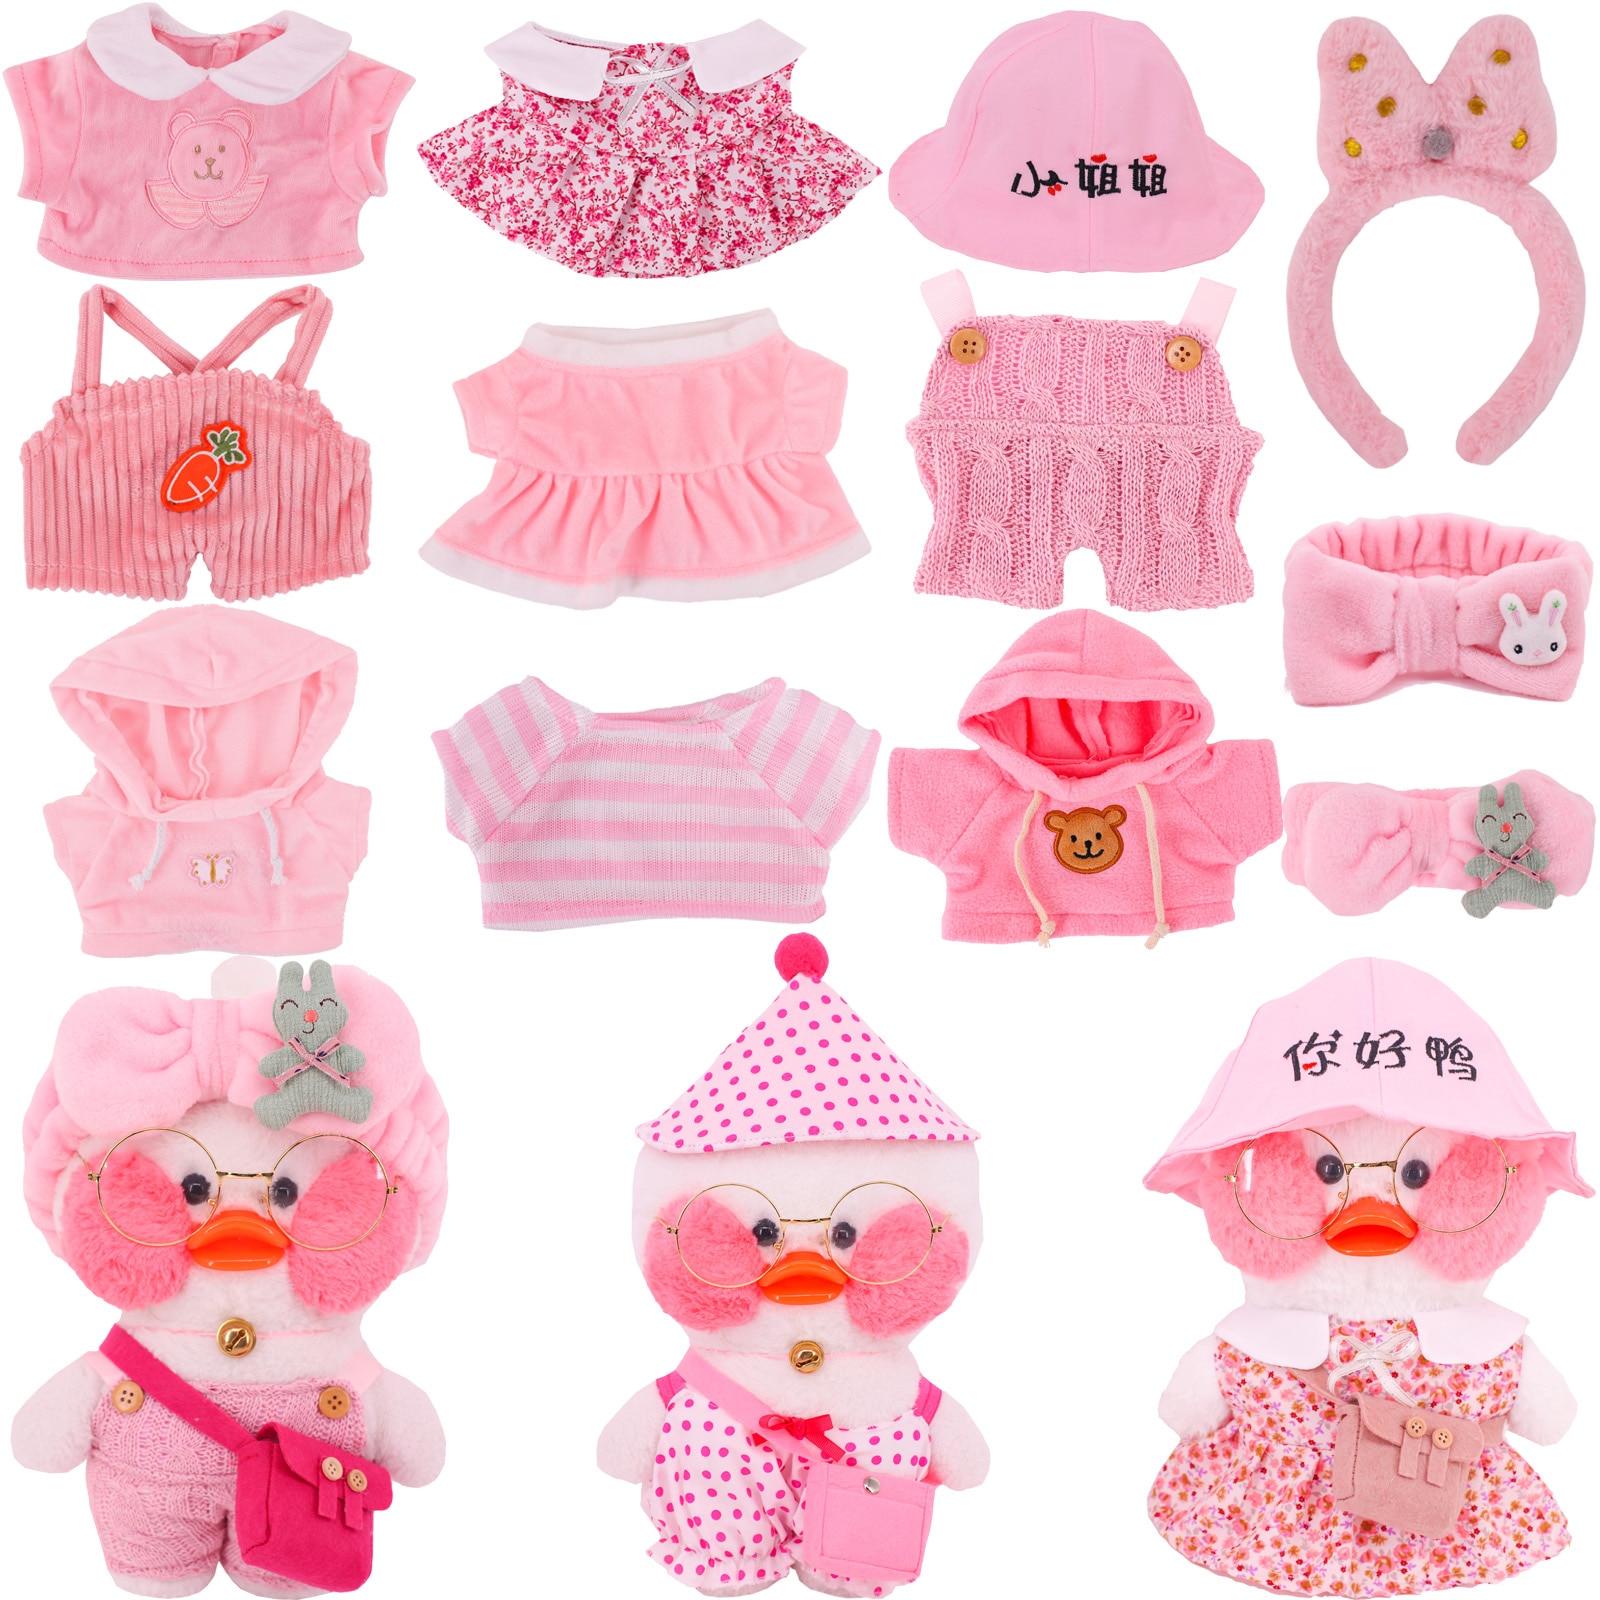 Kawaii Pink Duck Clothes Accessories lalafanfan Clothes Hat Skirt for 30 Cm Pink Duck Animal Plush - Lalafanfan Shop